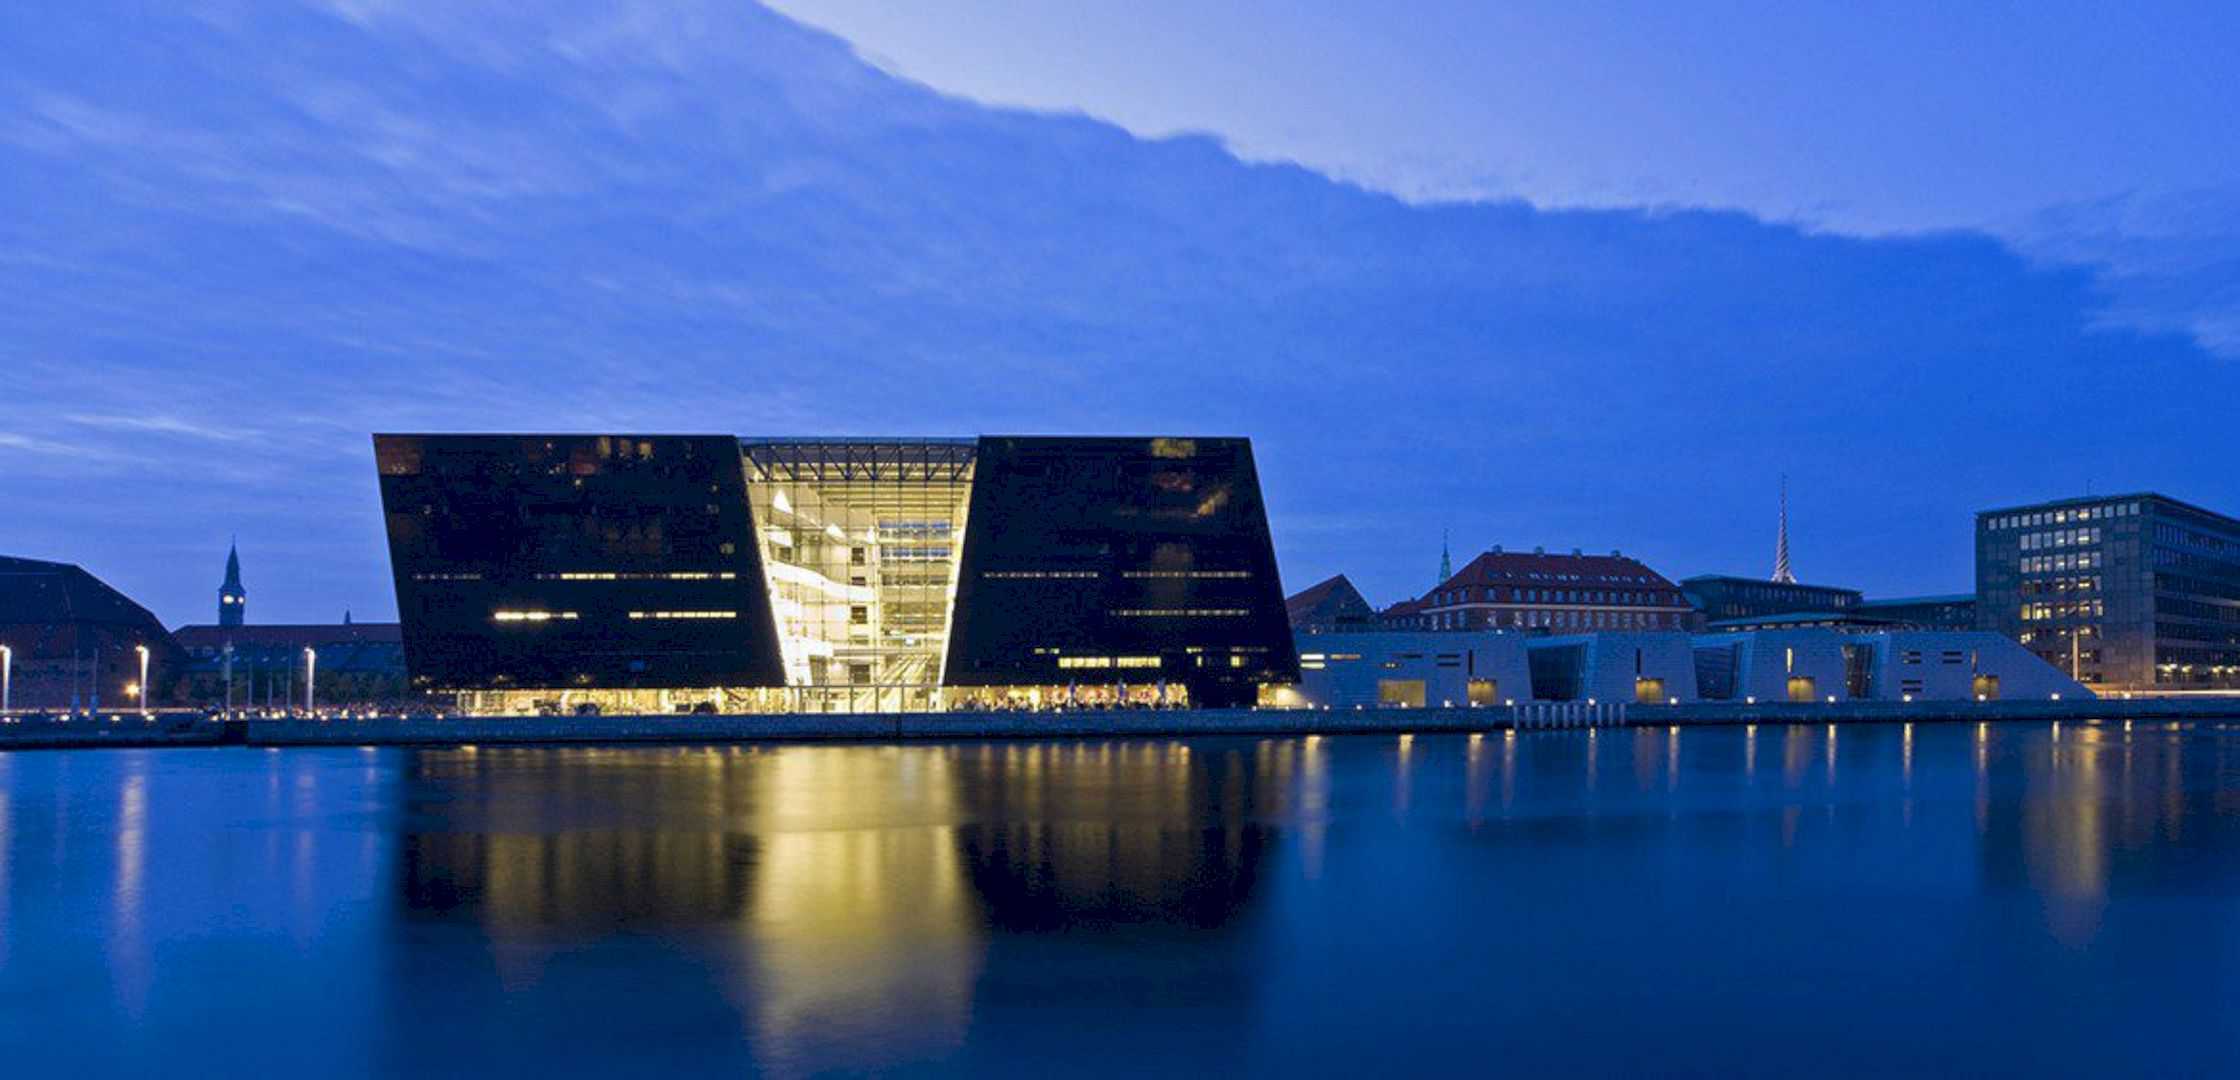 The Royal Library Extension An Example Of Significant Architectural Landmark On Copenhagen Waterfront 7